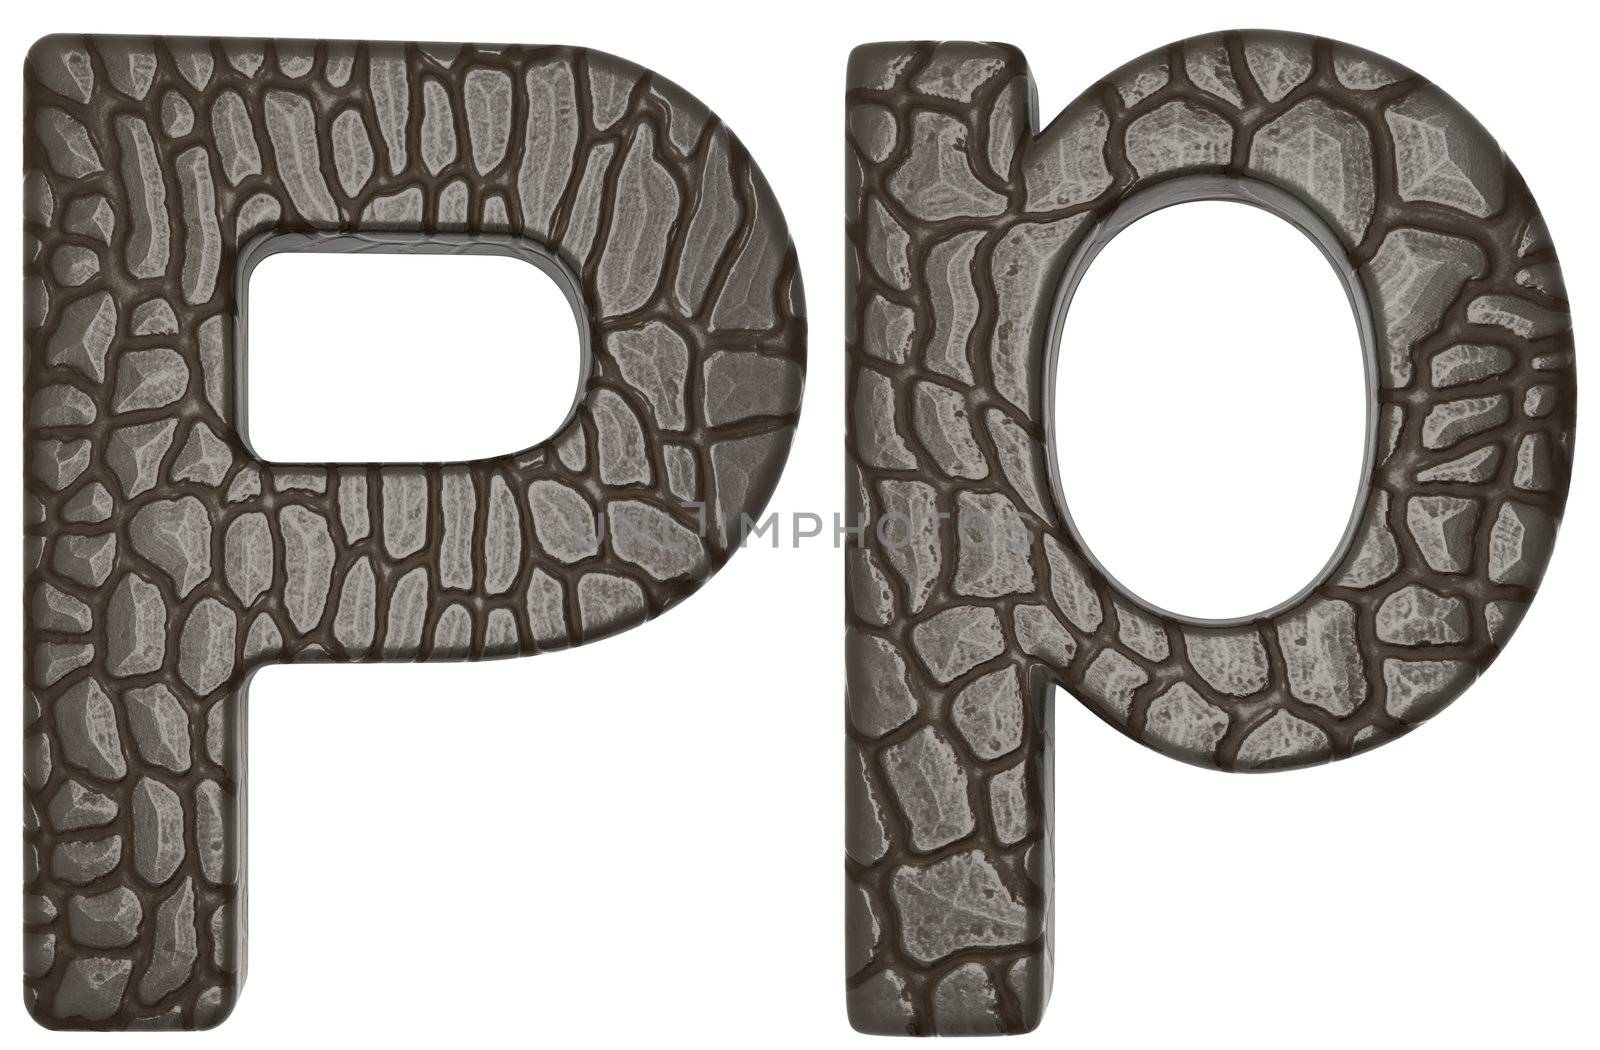 Alligator skin font P lowercase and capital letters isolated on white